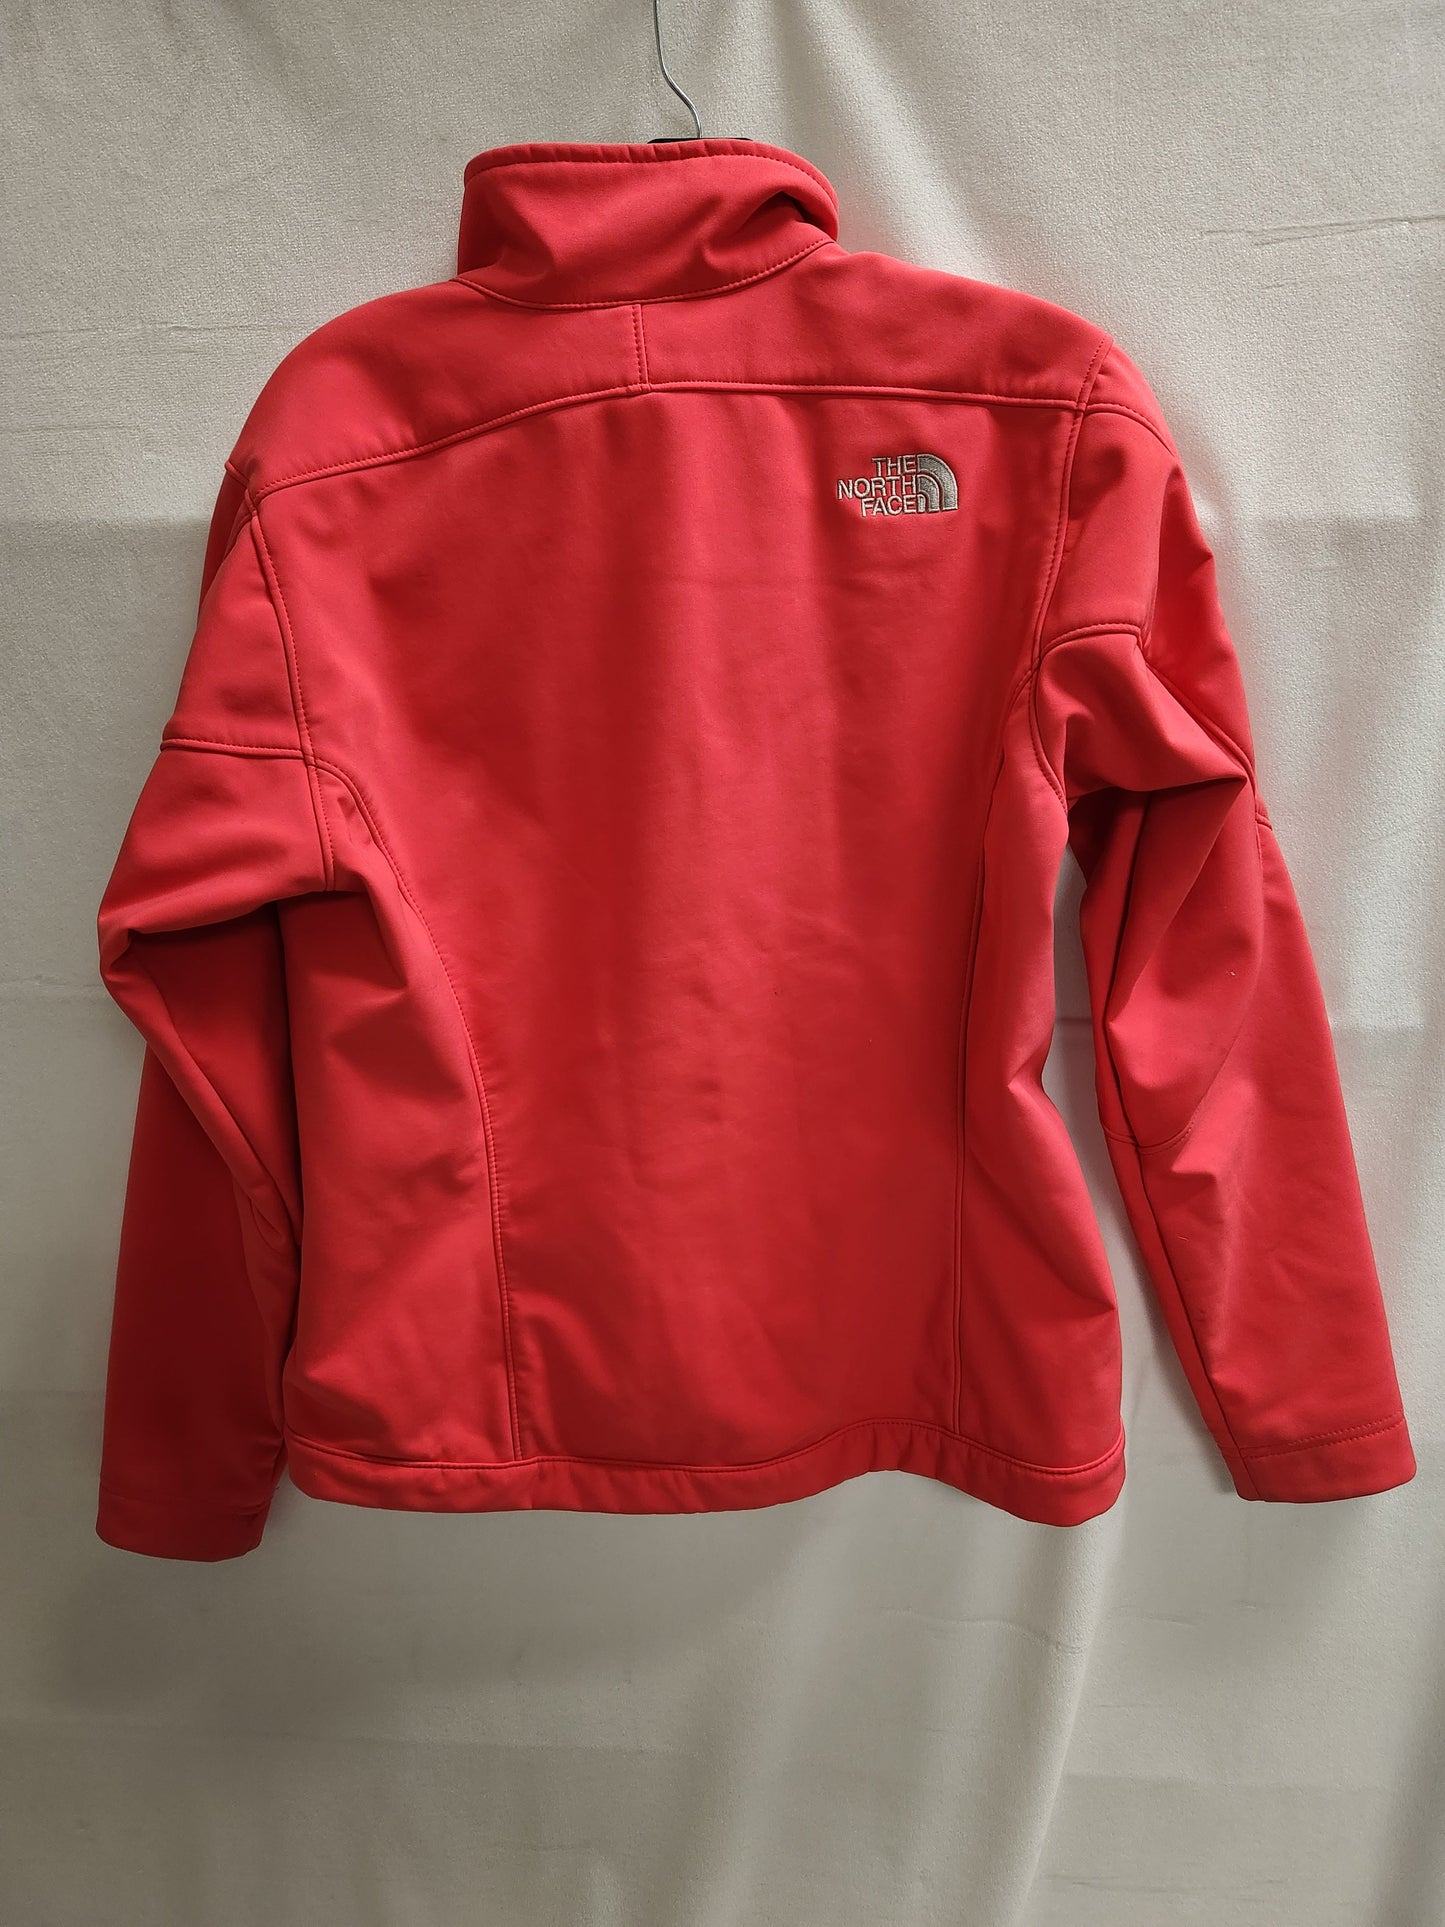 Coat Raincoat By North Face  Size: M